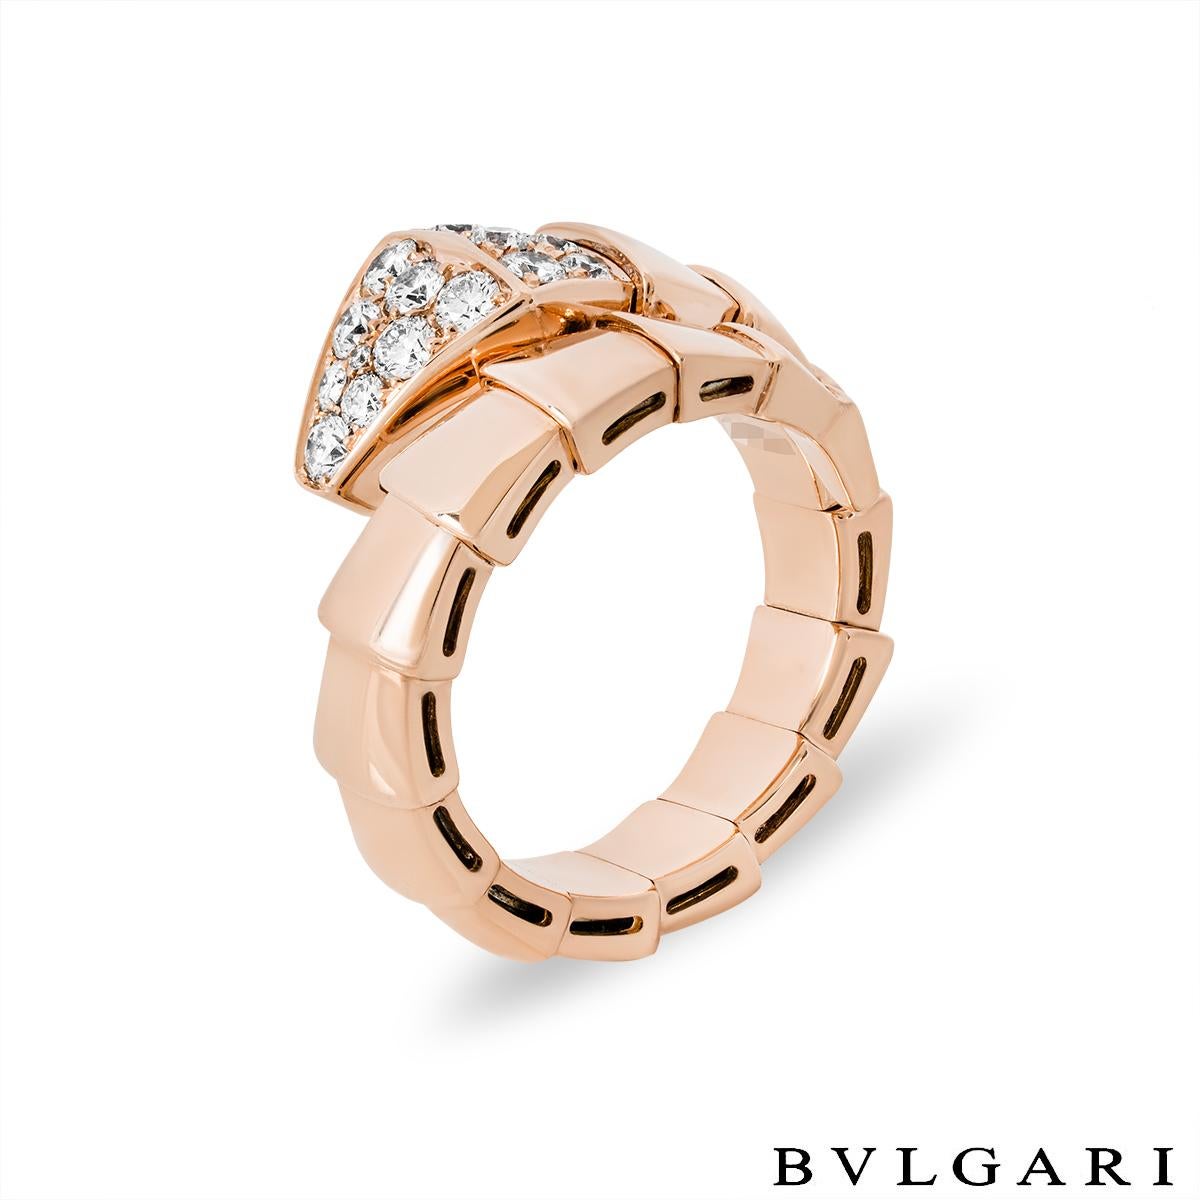 A sophisticated 18k rose gold diamond ring by Bvlgari from the Serpenti collection. The ring is in the form of a serpent wrapping around the finger, comprising 18 graduating flexible intersections including the diamond set head of a snake. The head